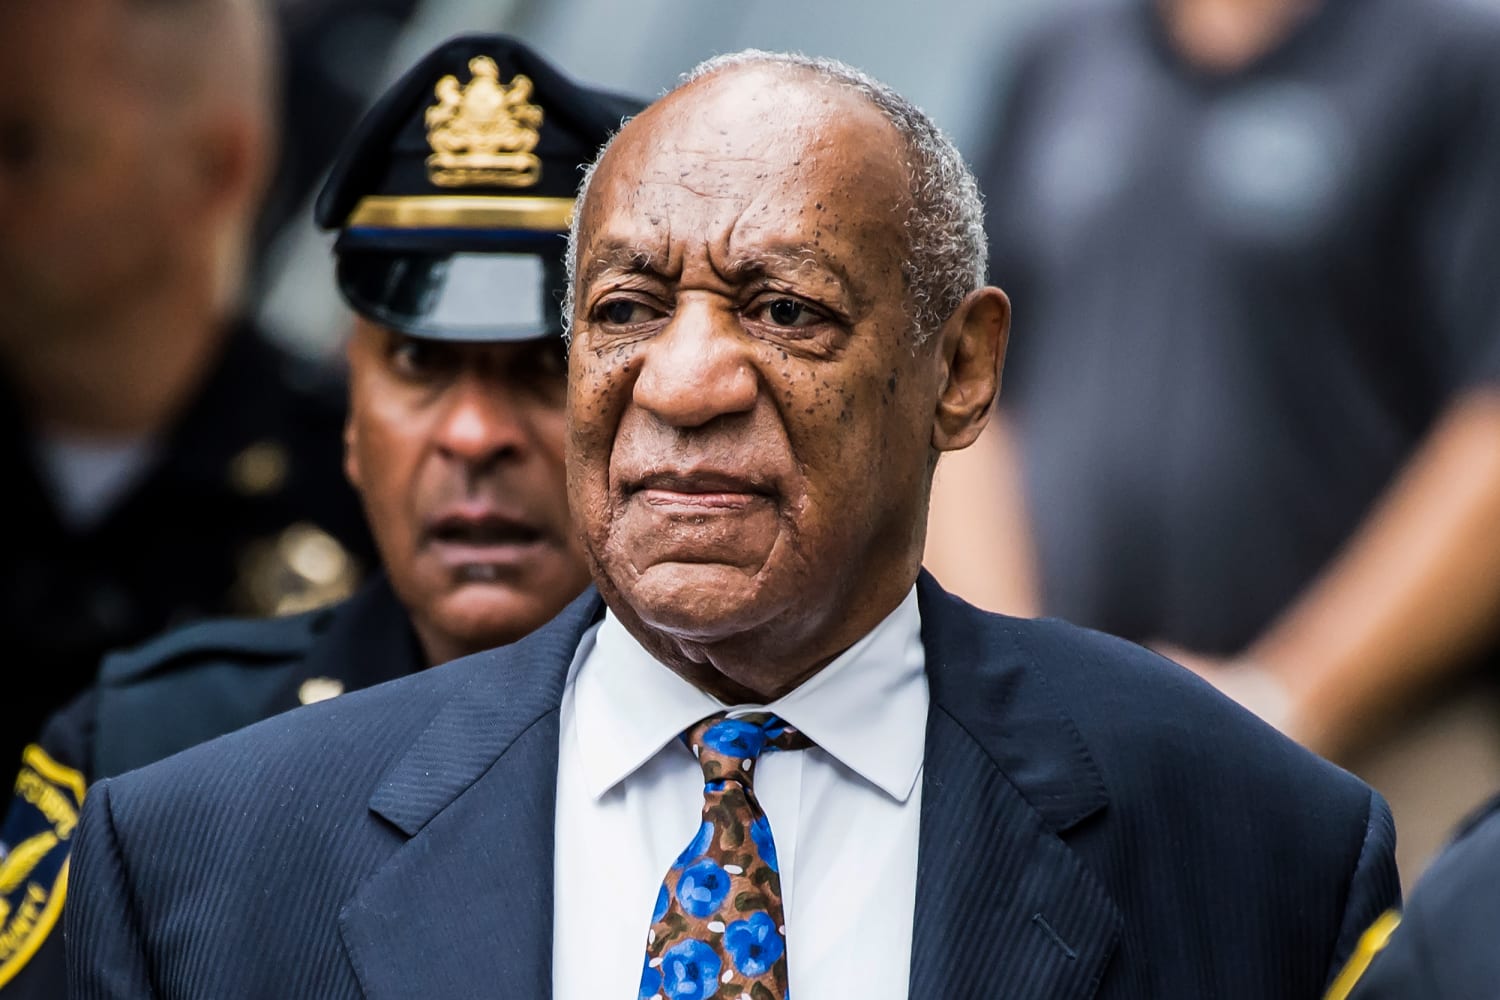 Bill Cosby faces new sexual assault lawsuits after states extend statutes of limitations